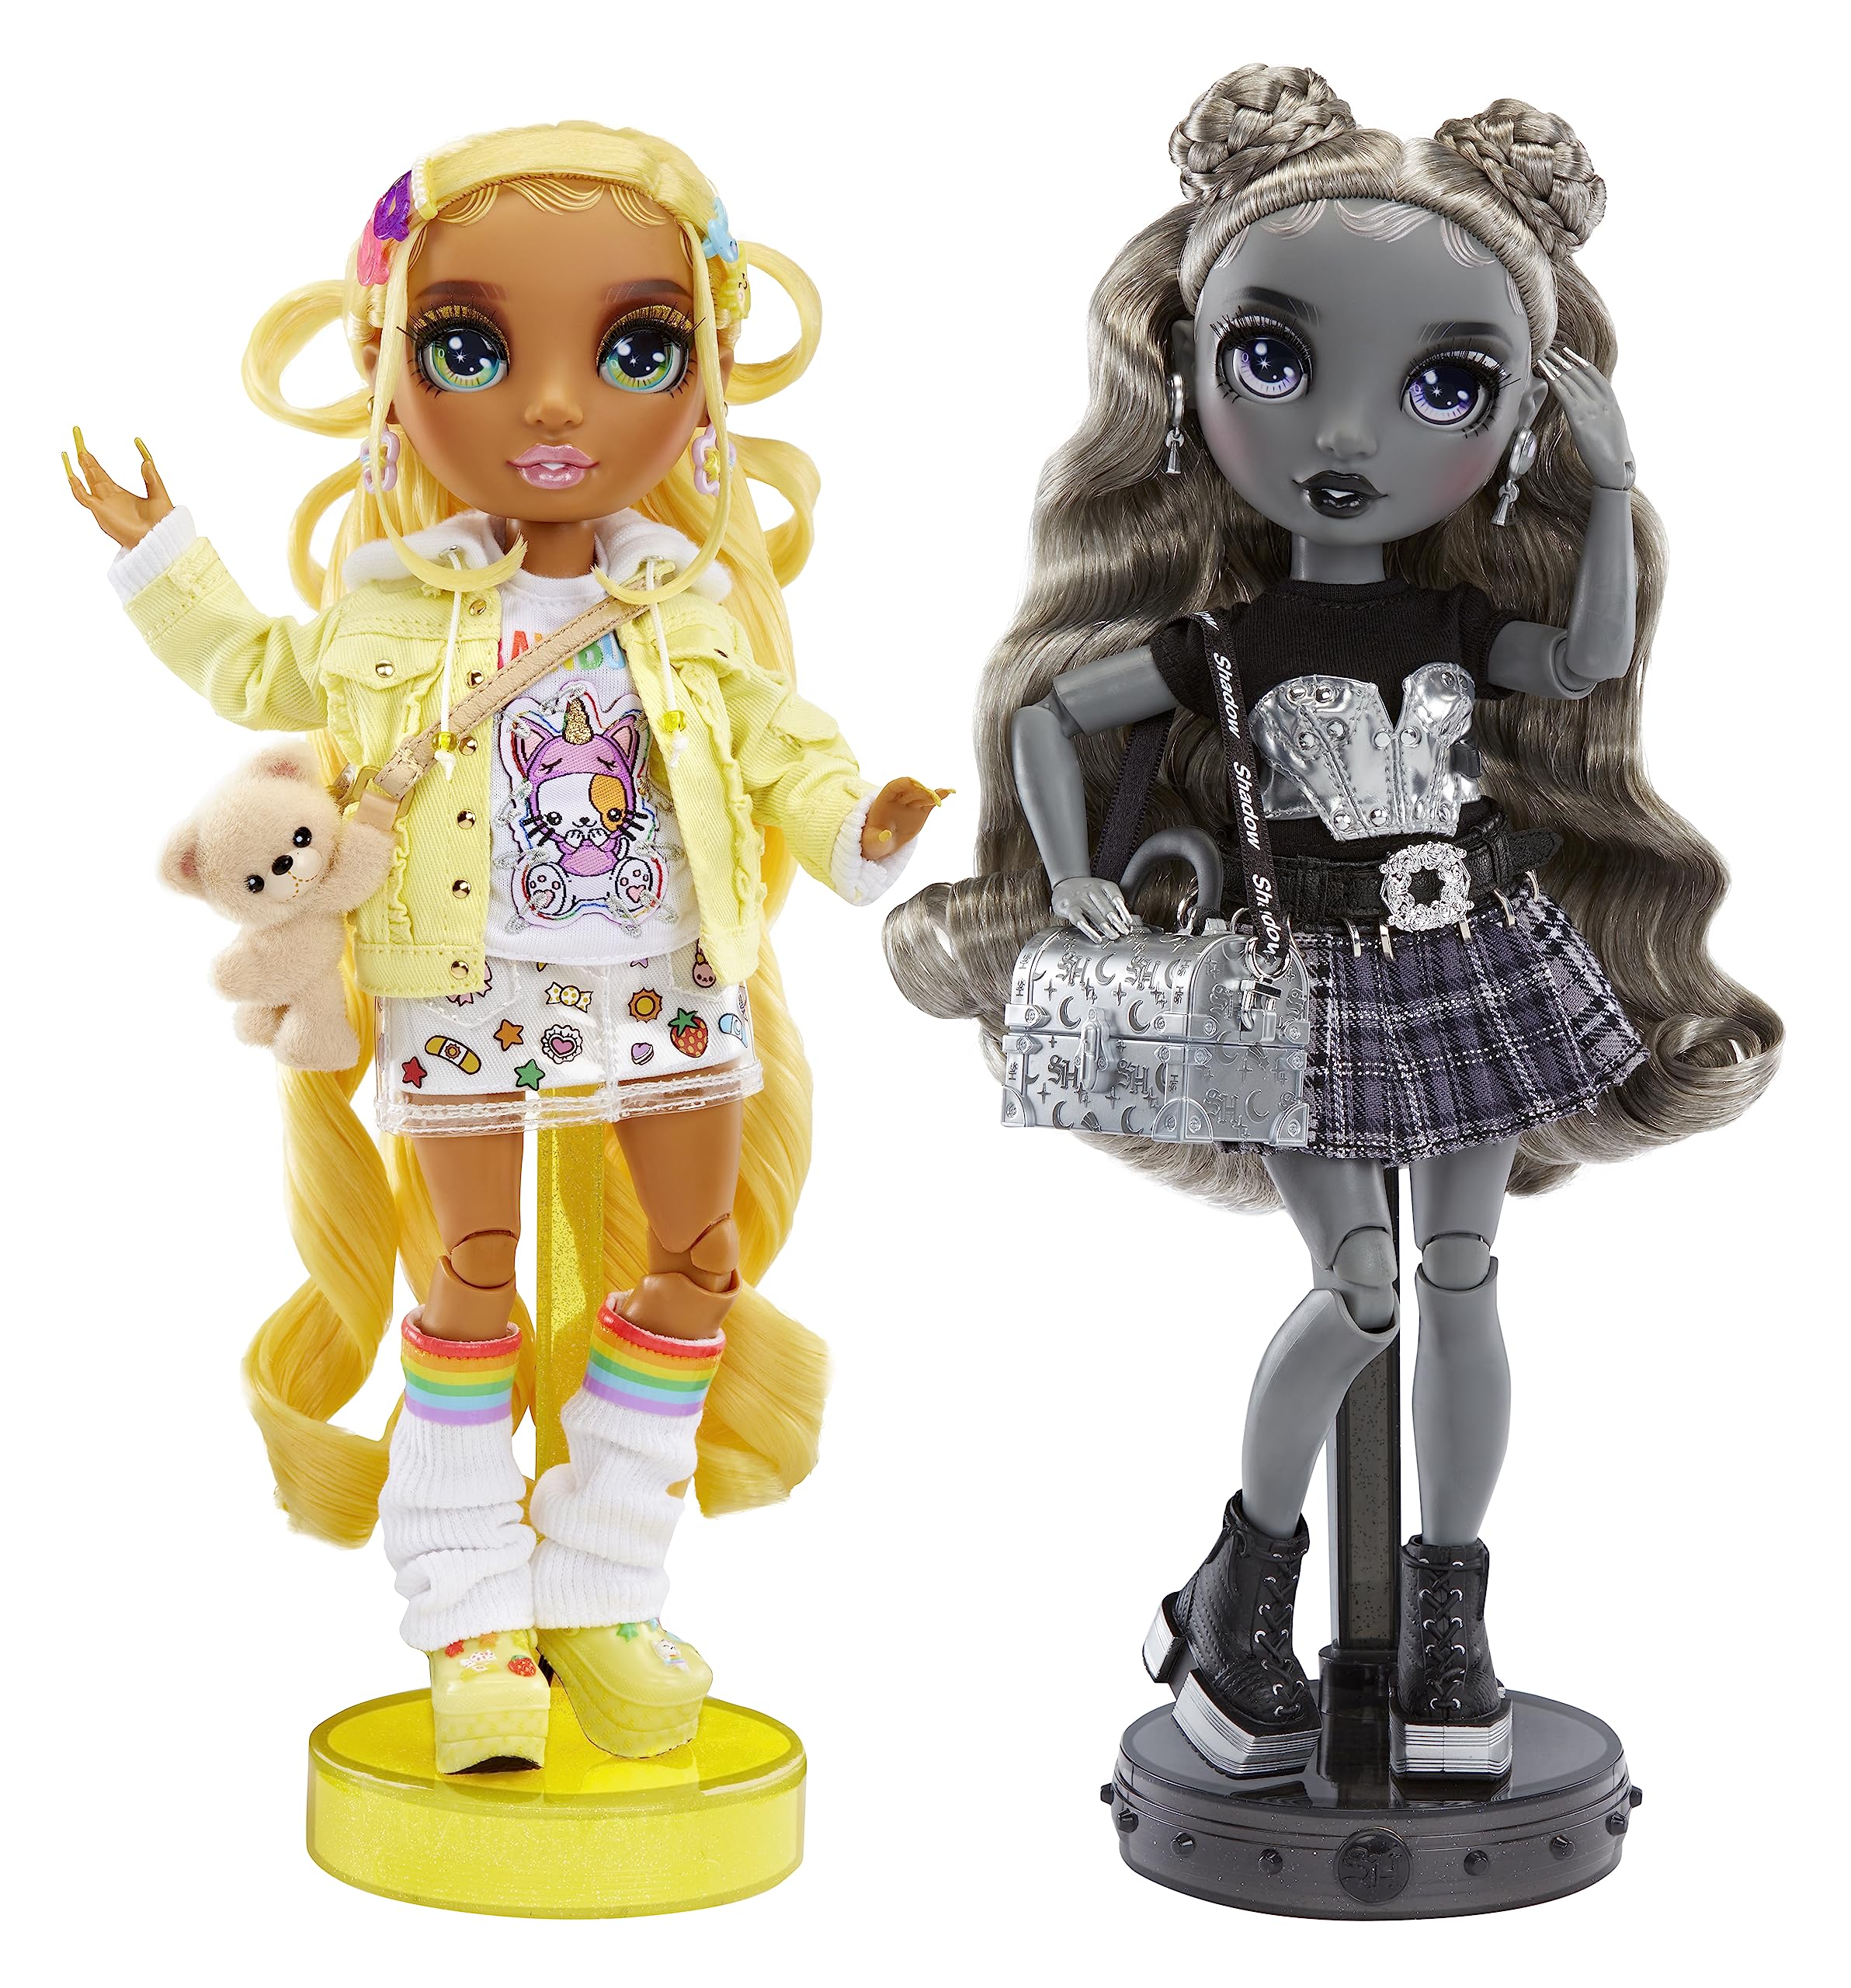 Rainbow High Shadow High Special Edition Madison Twins- 2-Pack Fashion Doll. Yellow & Grey Designer Outfits with Accessories, Mix and Match Outfits, Great Gift for Kids 4-12 Years Old & Collectors